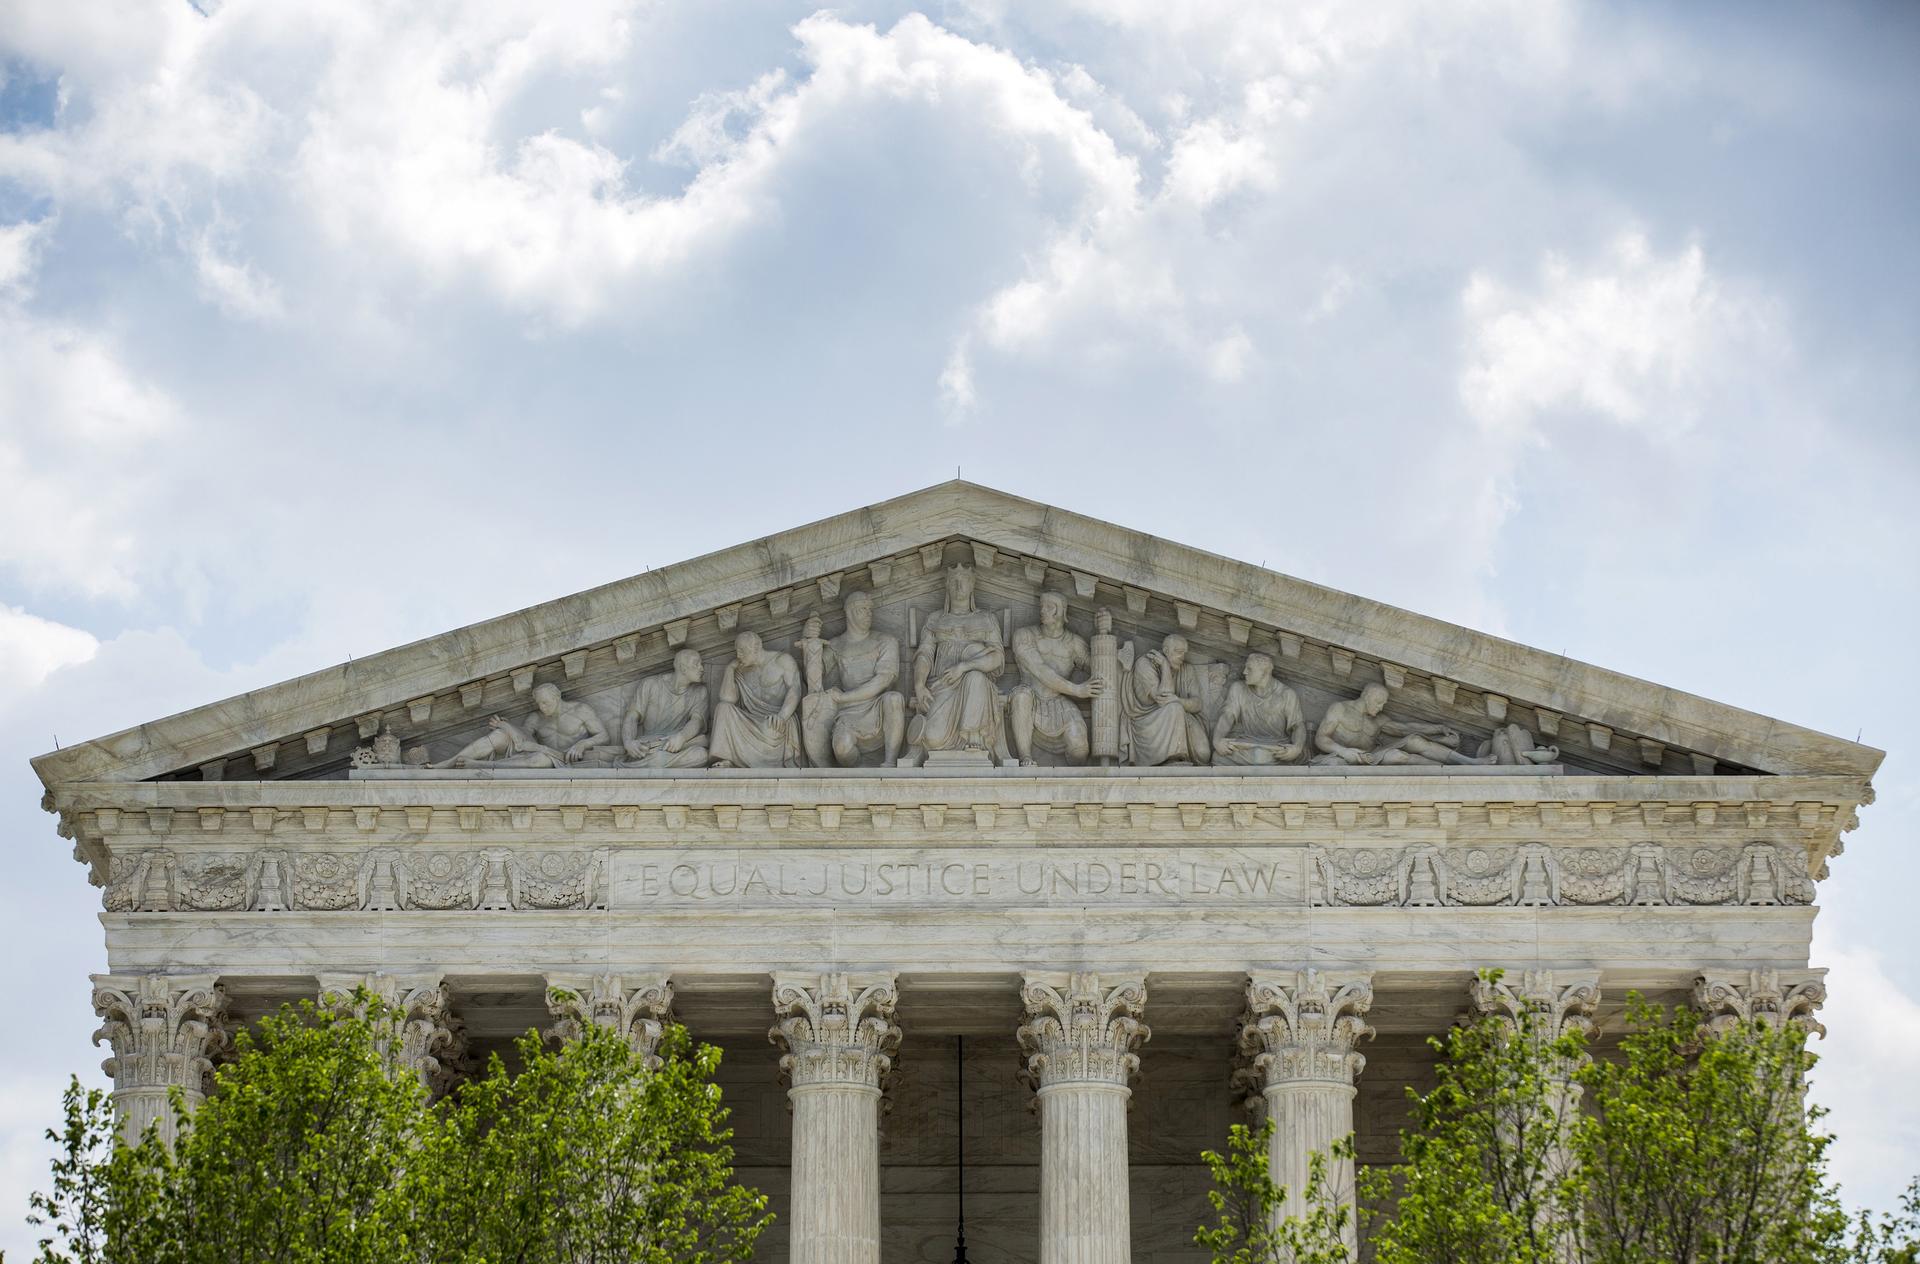 The US Supreme Court stands in Washington.